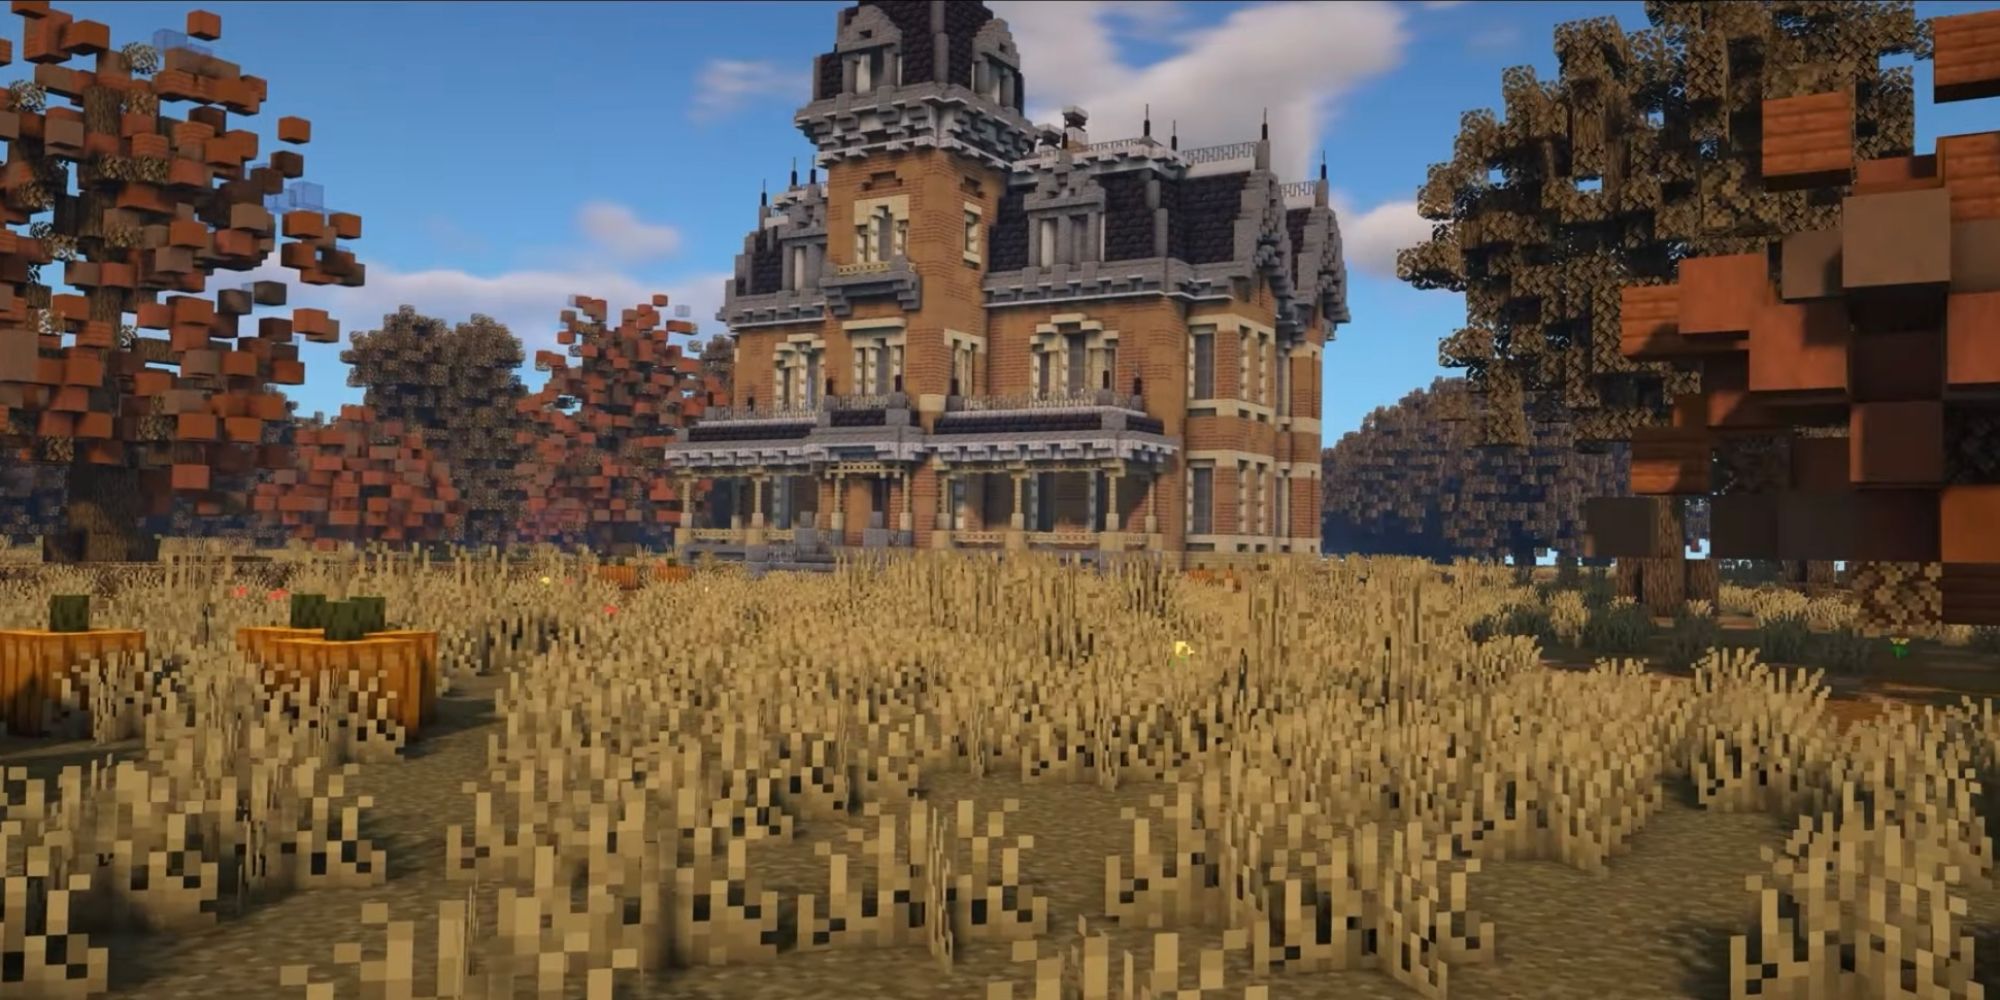 An image from Minecraft of a haunted mansion in the Victorian architectural style.